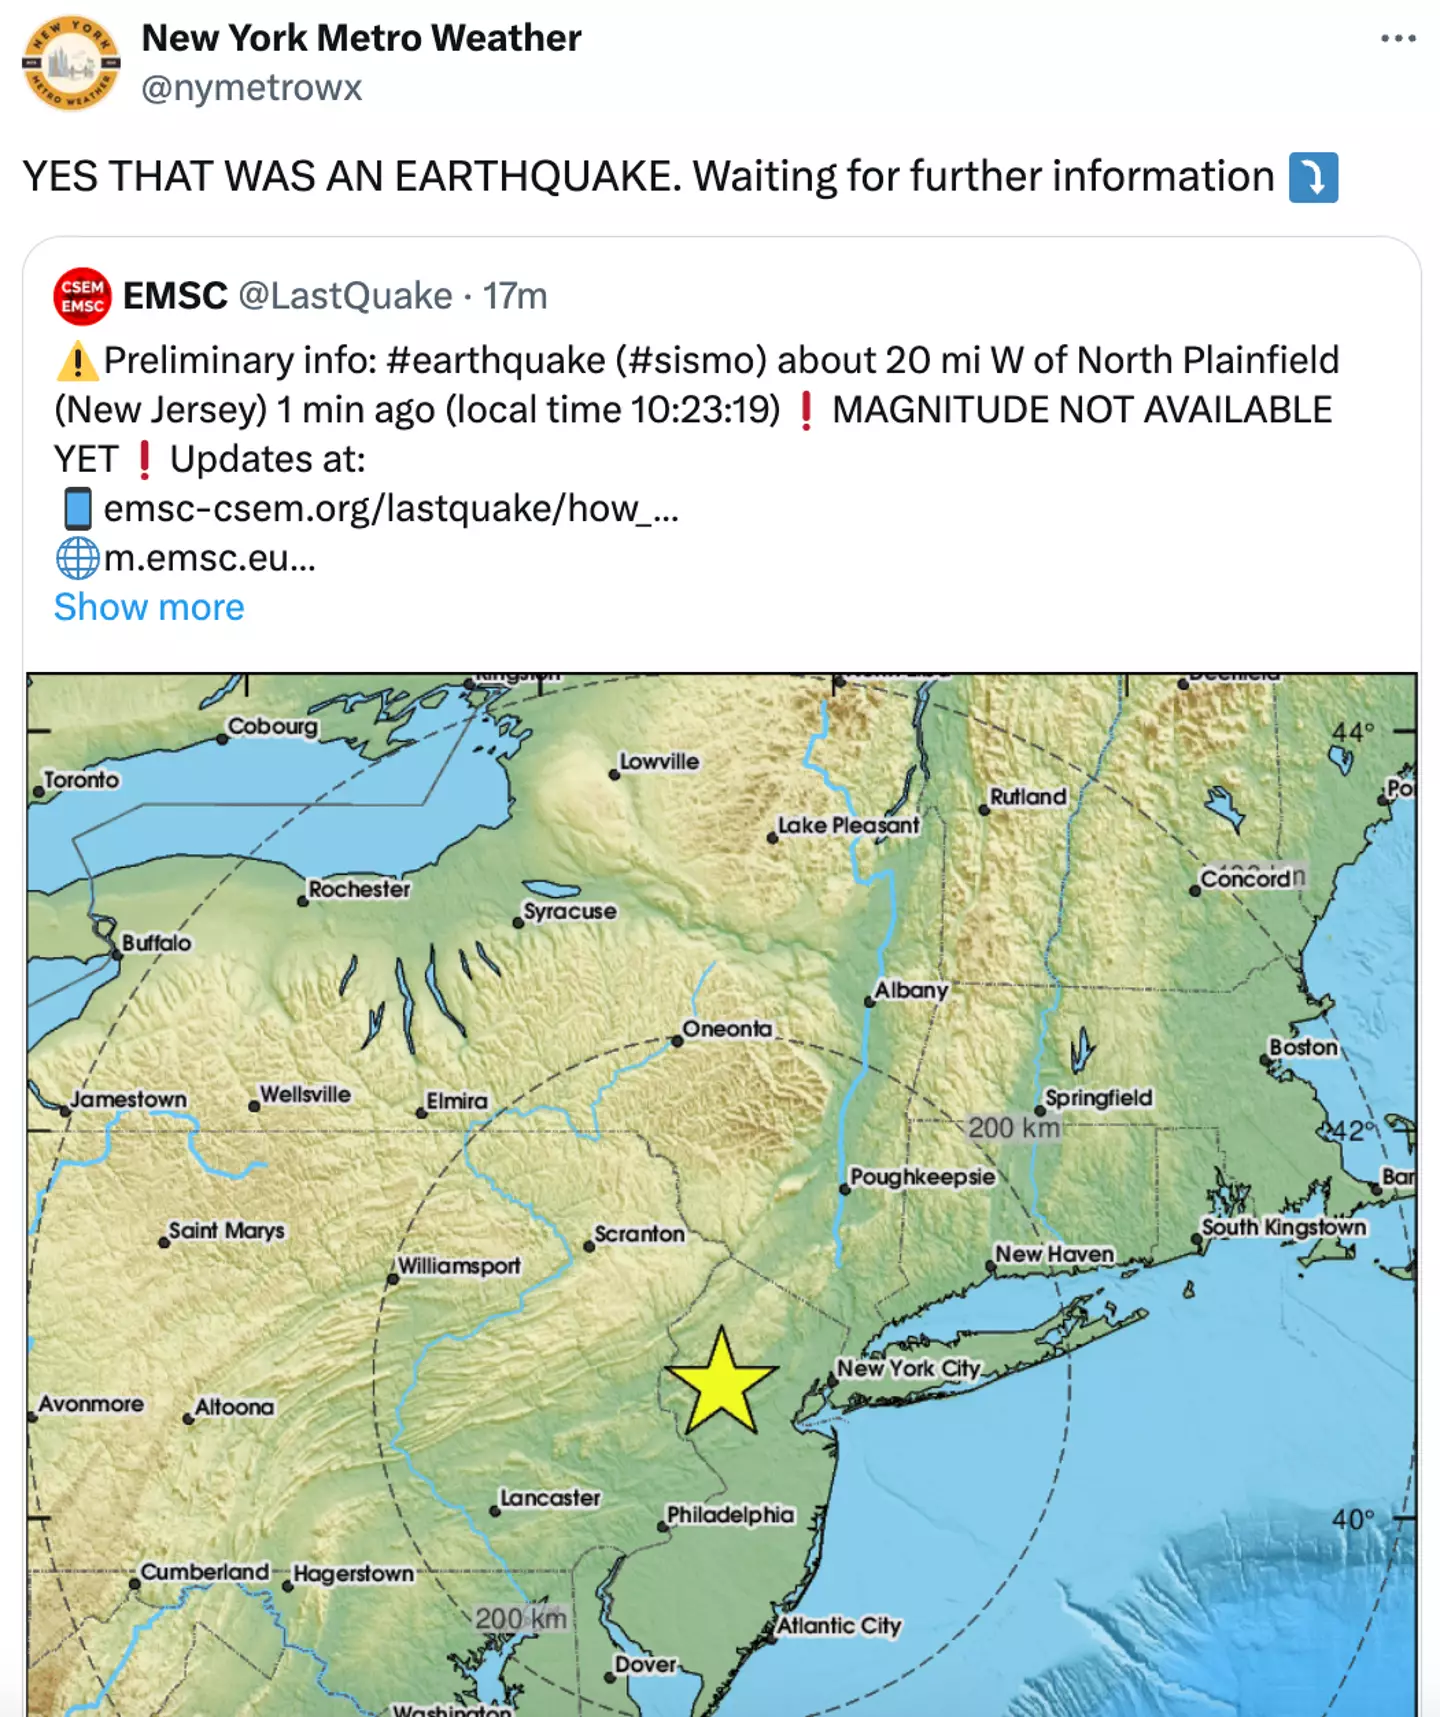 New York Metro Weather confirmed news of the earthquake.